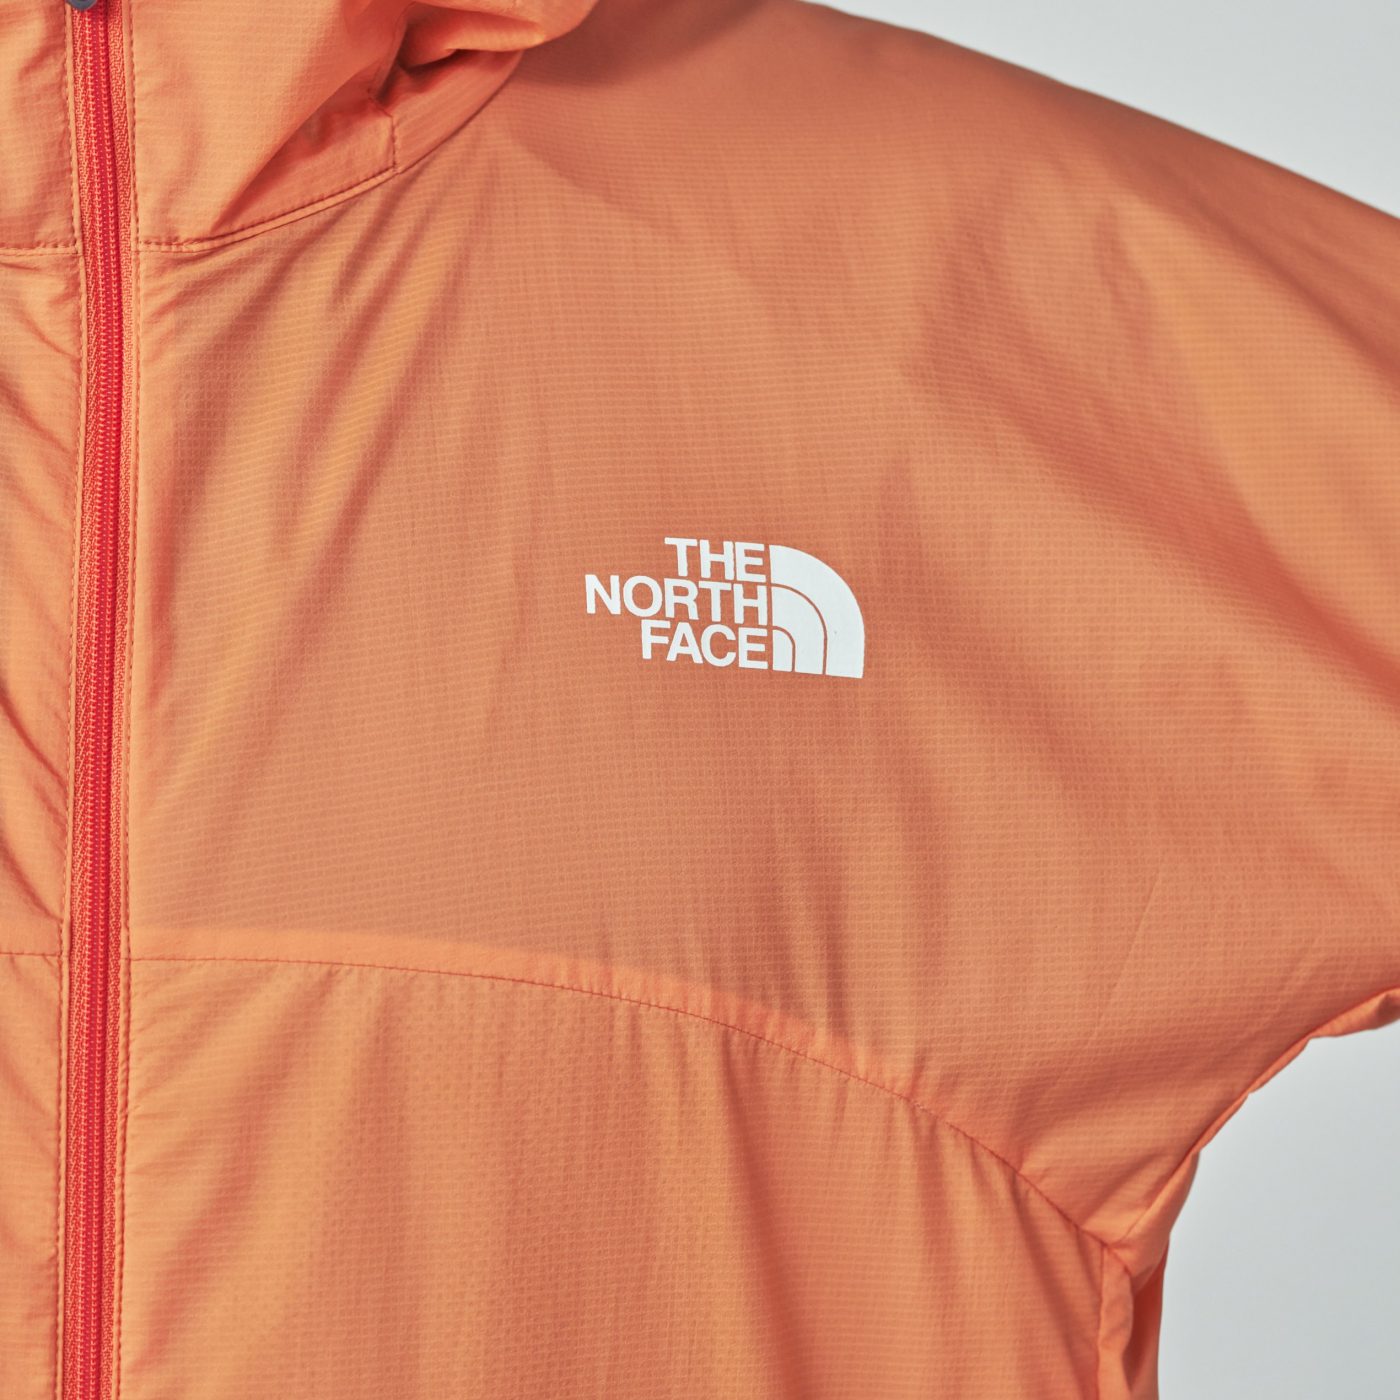 SWALLOWTAIL HOODIE(NP22202) - THE NORTH FACE MOUNTAIN